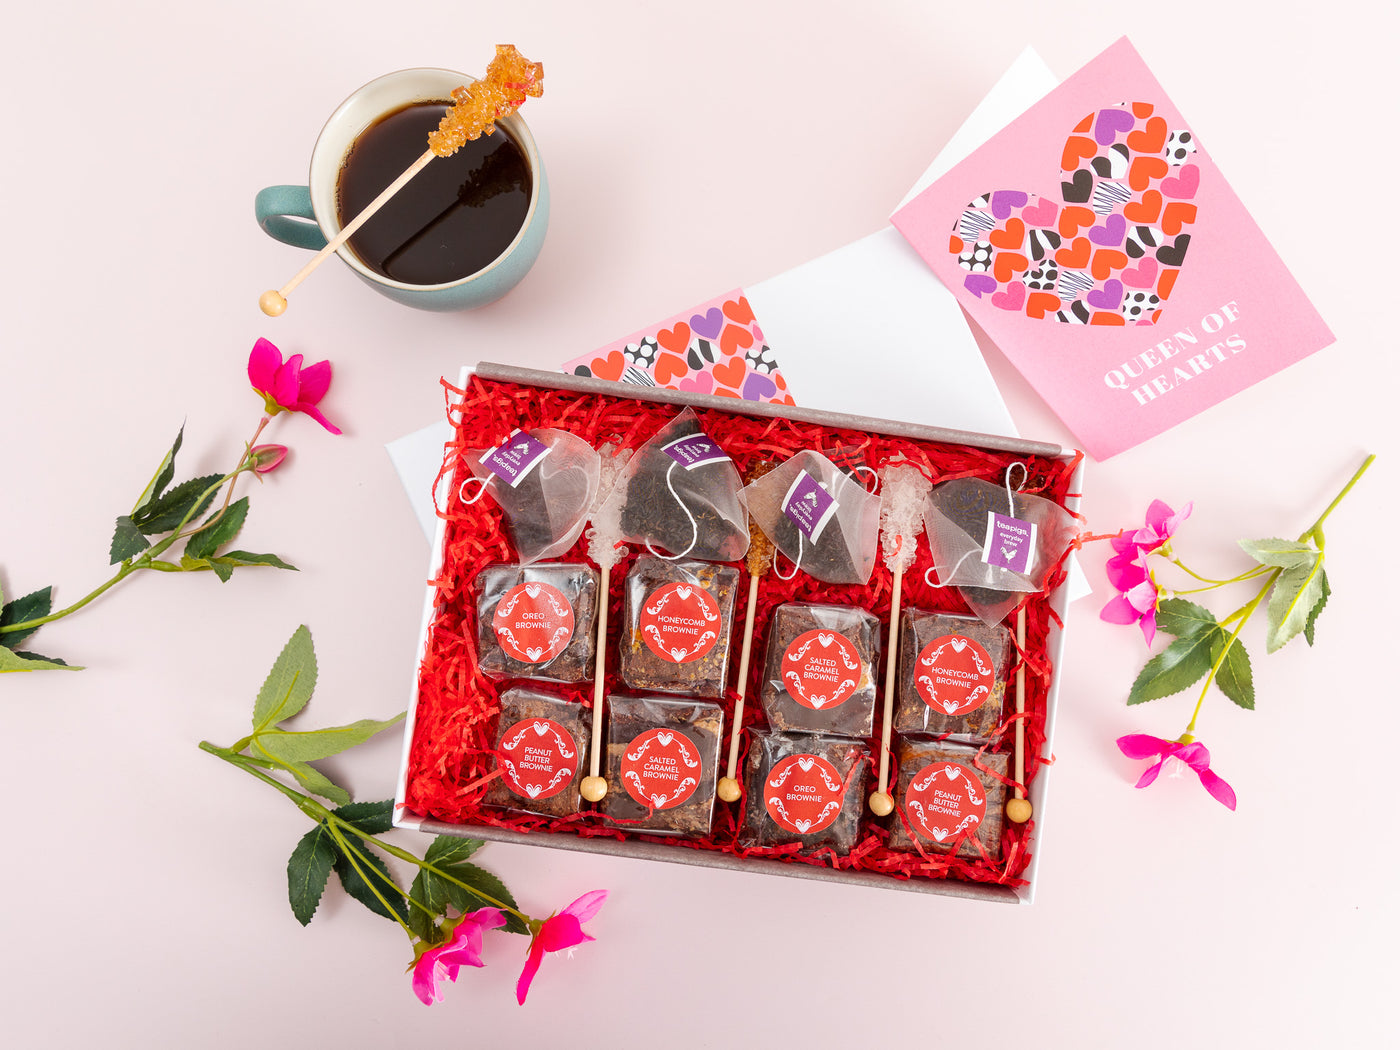 'Queen of Hearts' Afternoon Tea For Four Gift